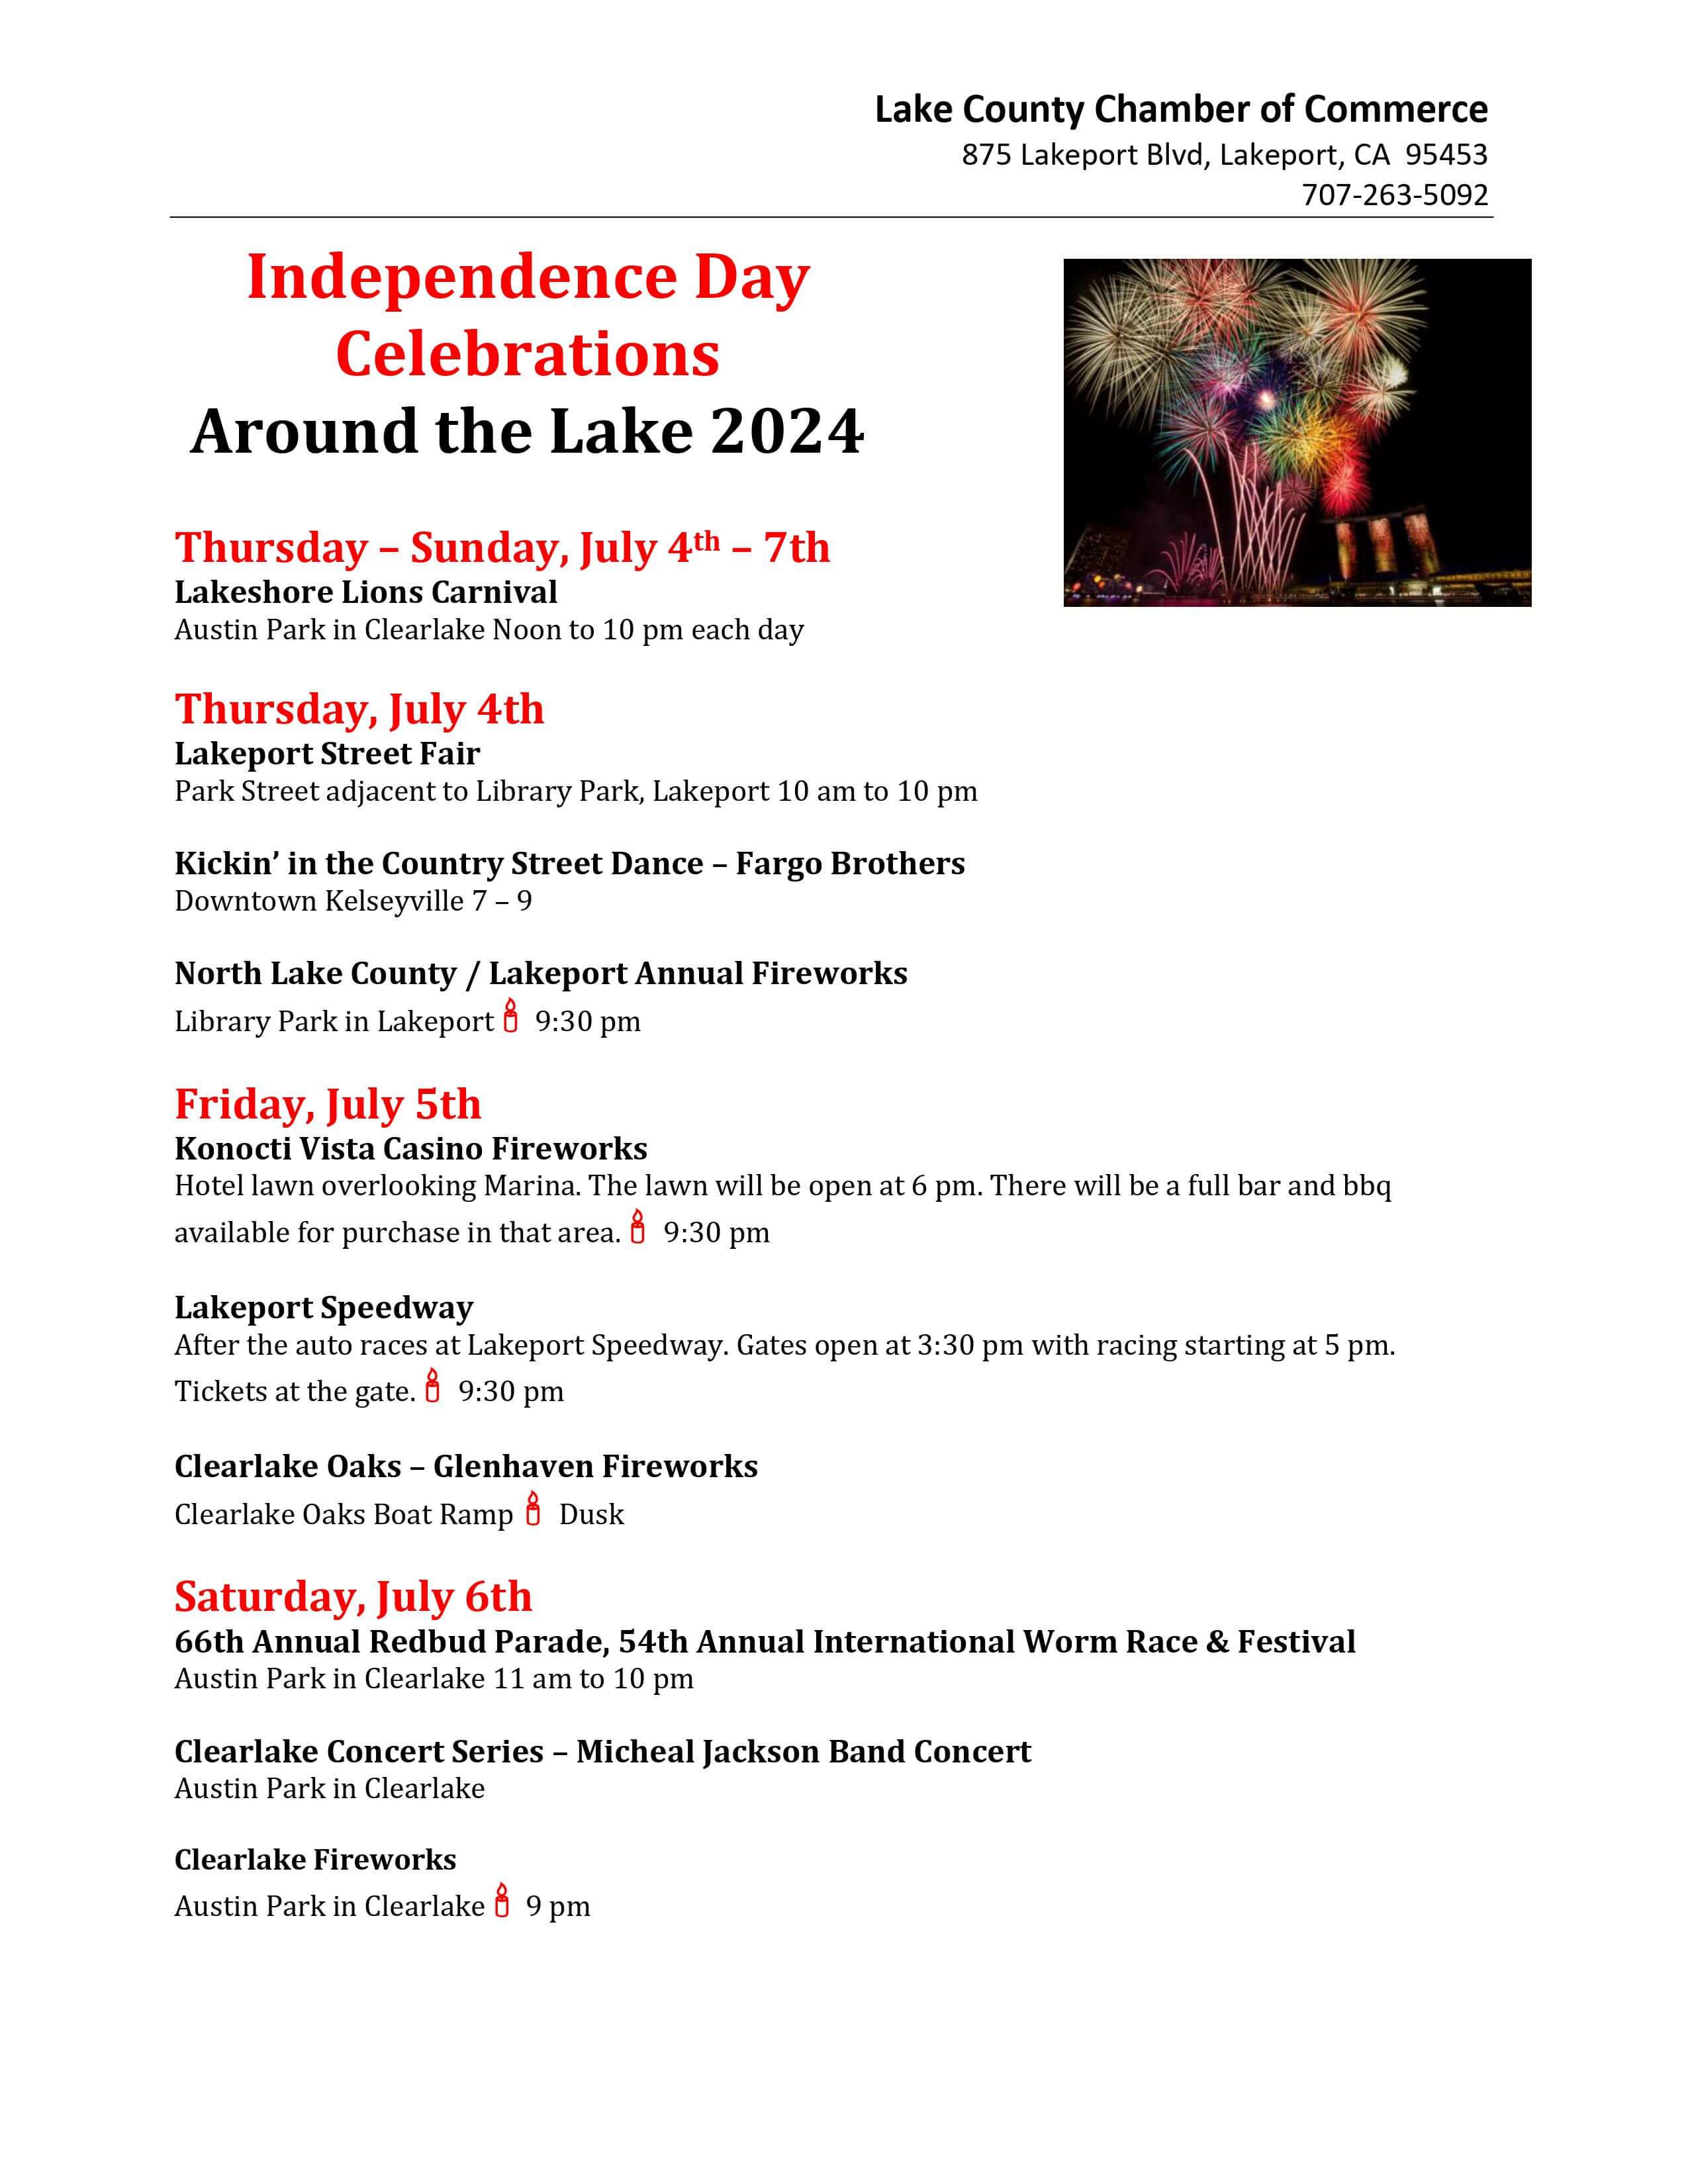 2024 Independence Day Happenings (2)